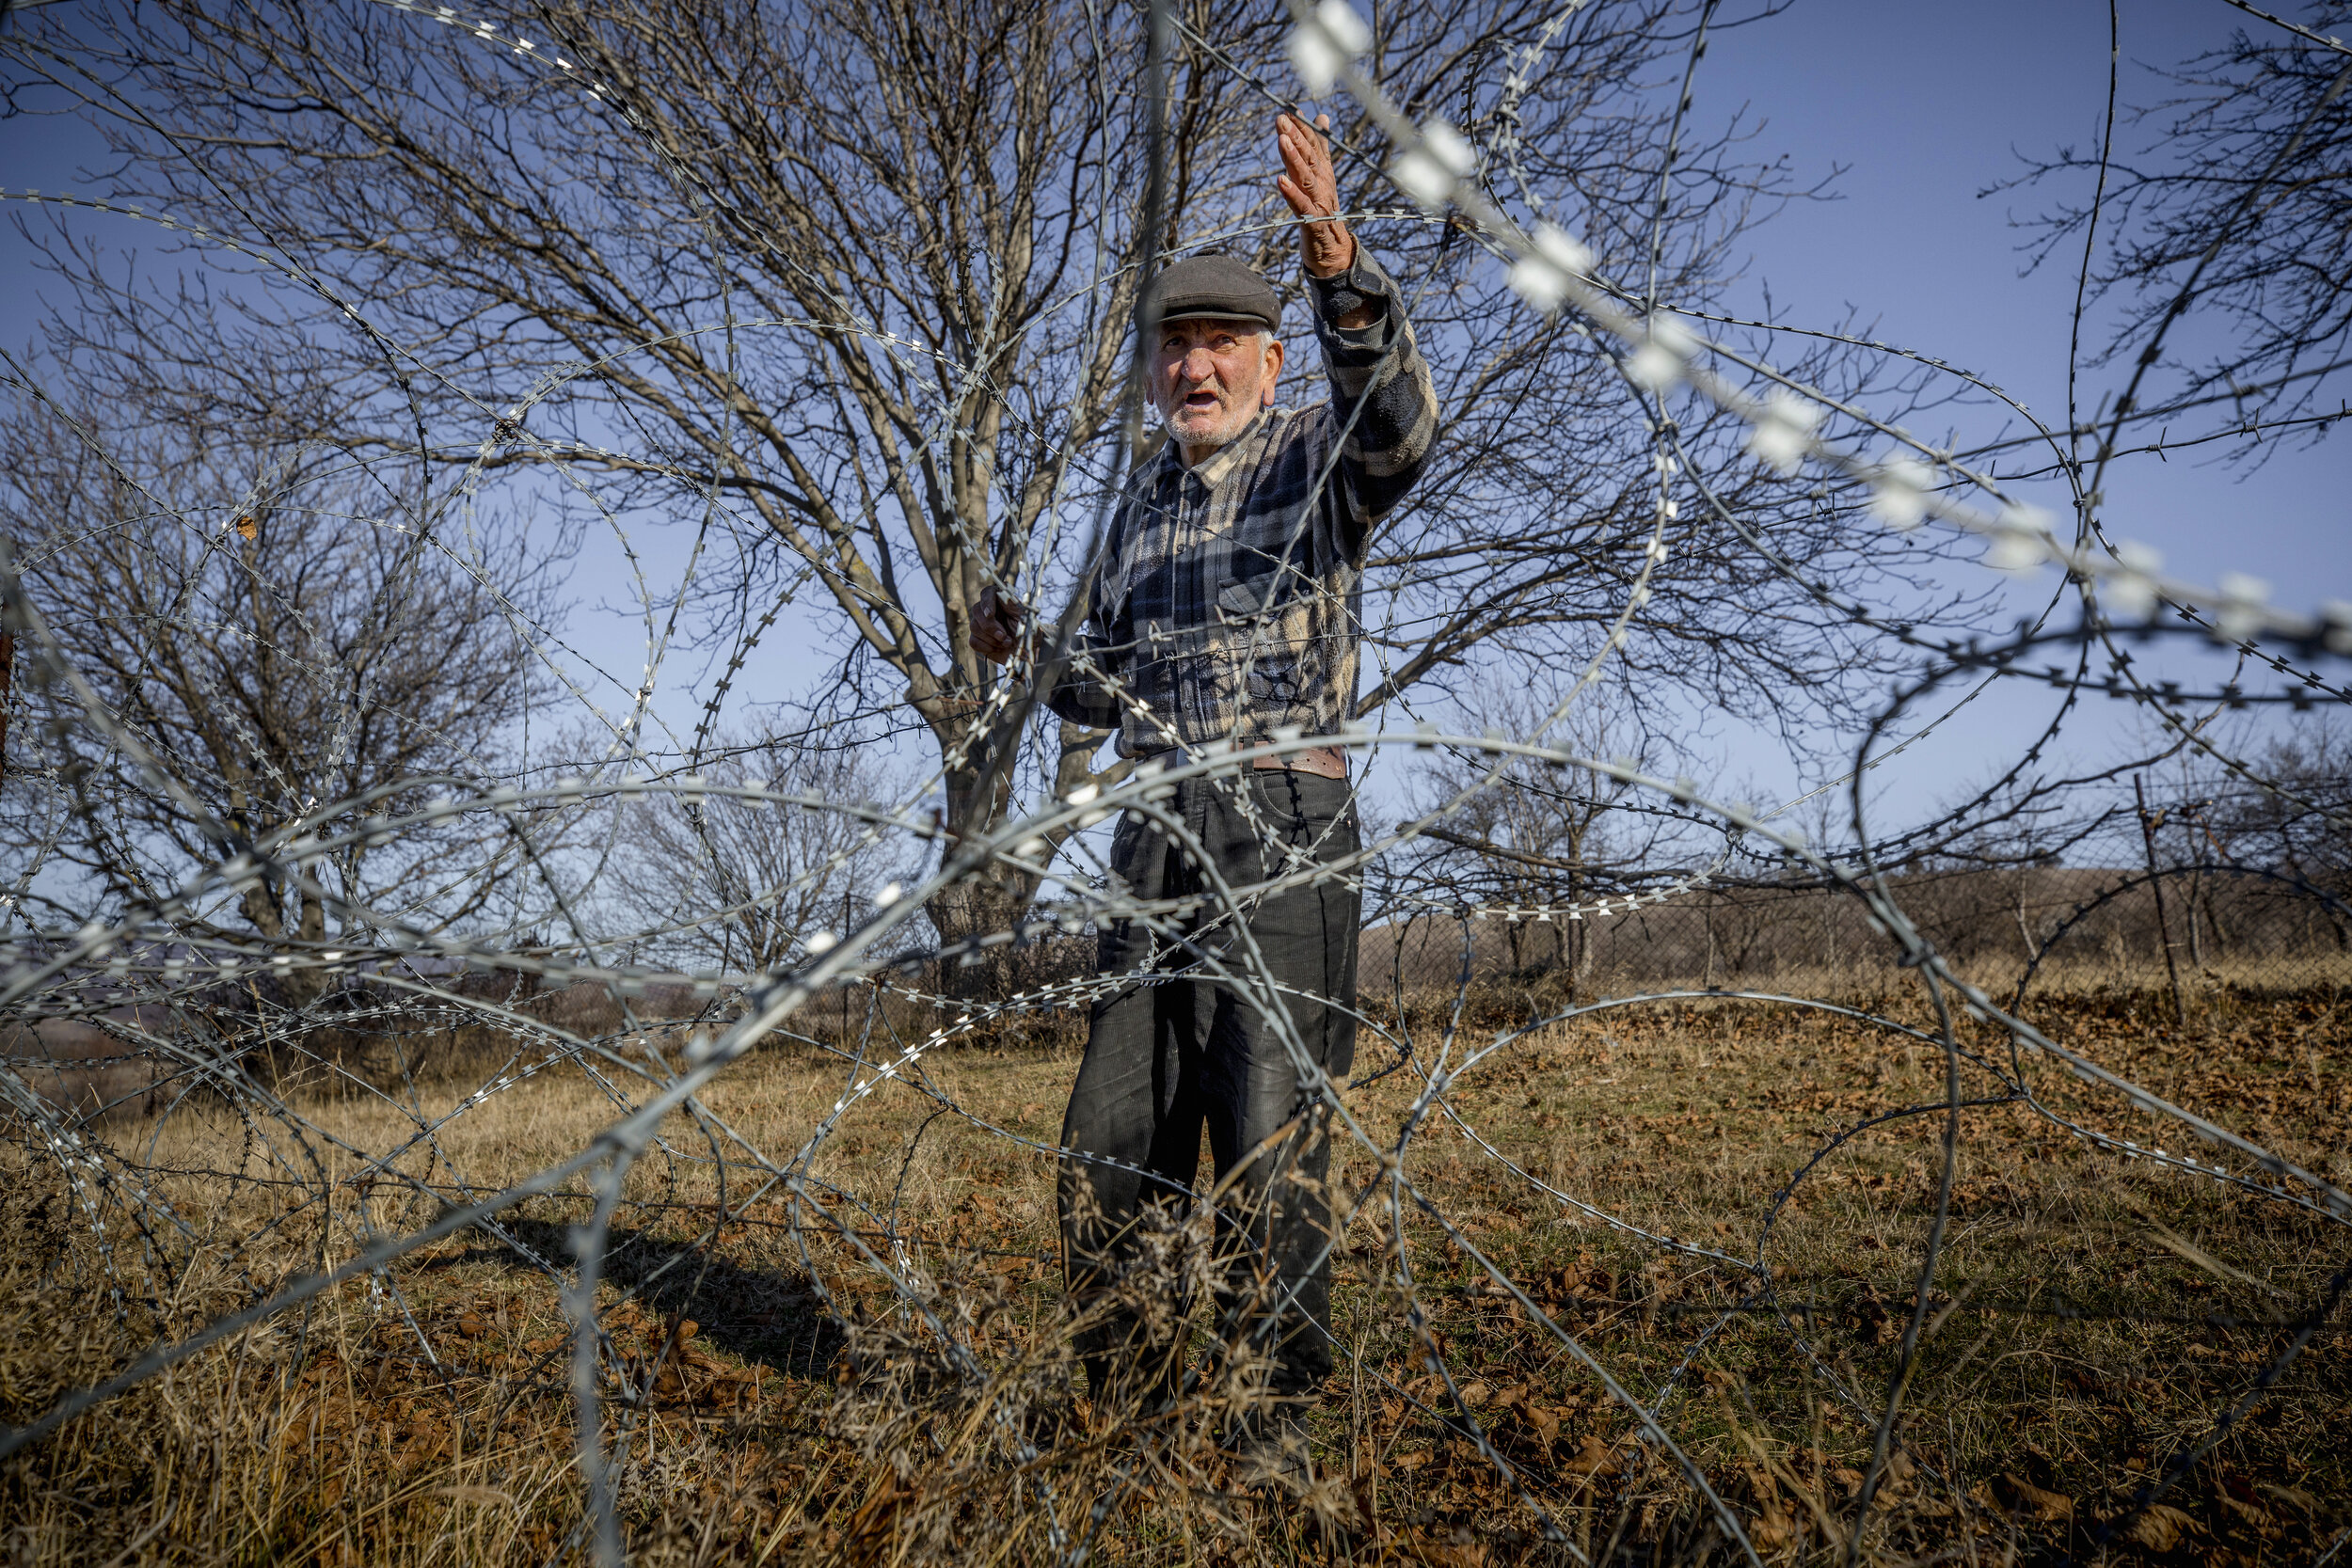  In the village of Khurvaleti ends Georgia and South Ossetia takes over, at least according to Russia's border. Georgian Davit Vanishvilis, 86, his house ended up on one side the barbed wire fence and his arable land on the other when Russian forces 